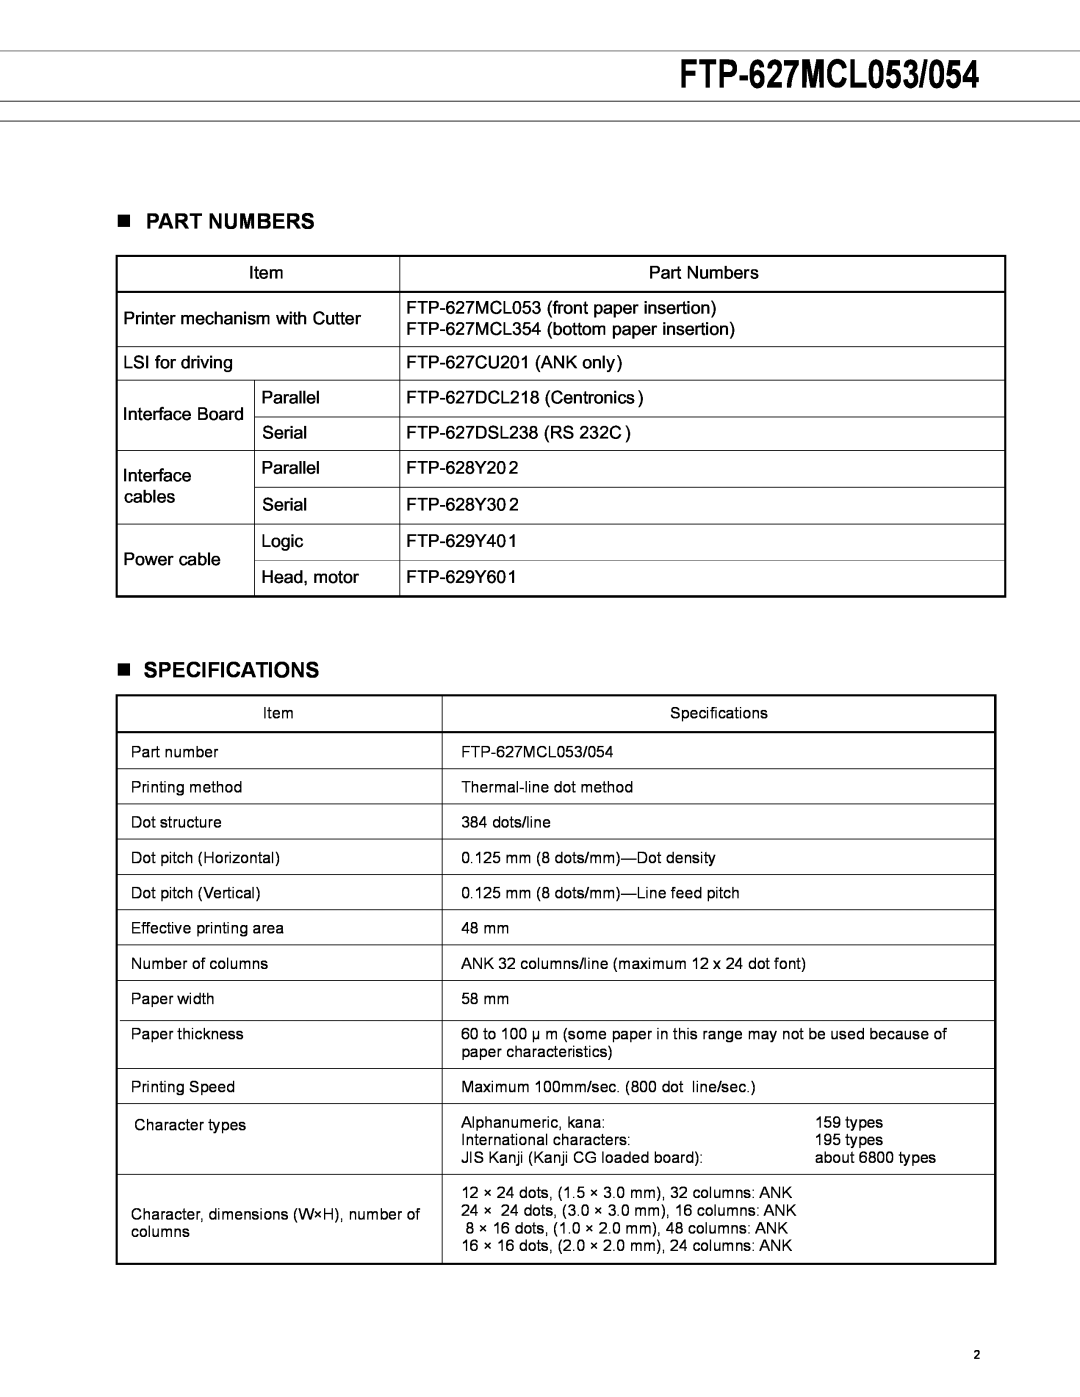 Fujitsu FTP-627MCL054 manual FTP-627MCL053/054, n Part numbers, n SPECIFICATIONS 